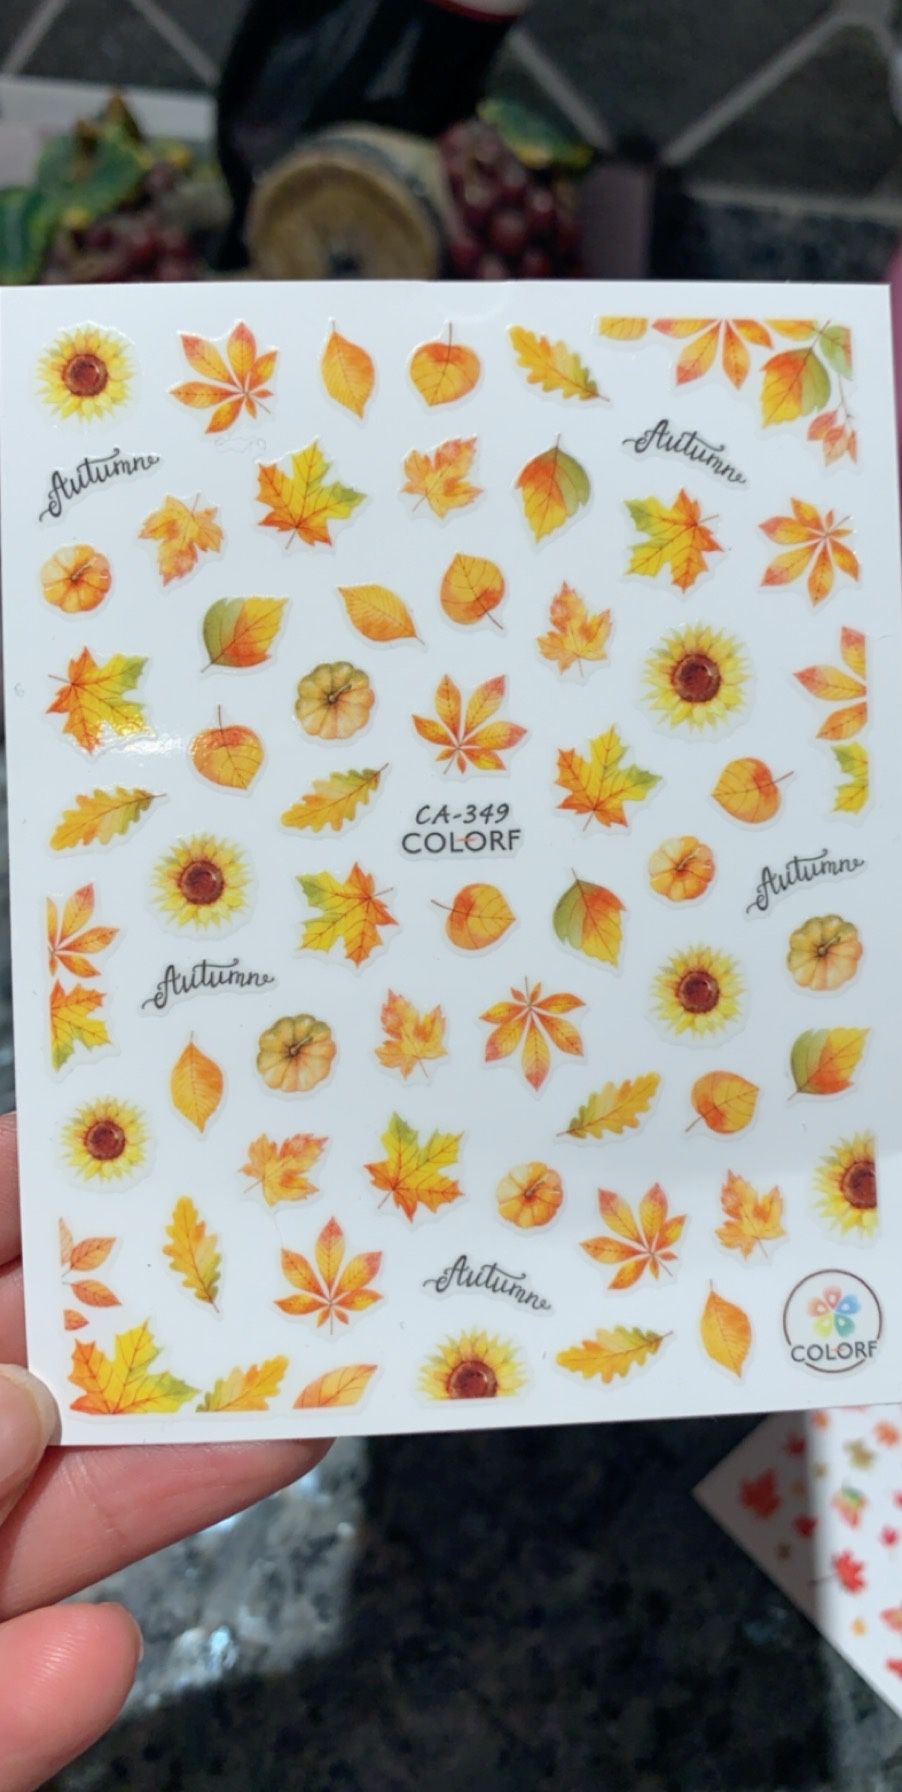 Nail decals for autumn 🍂